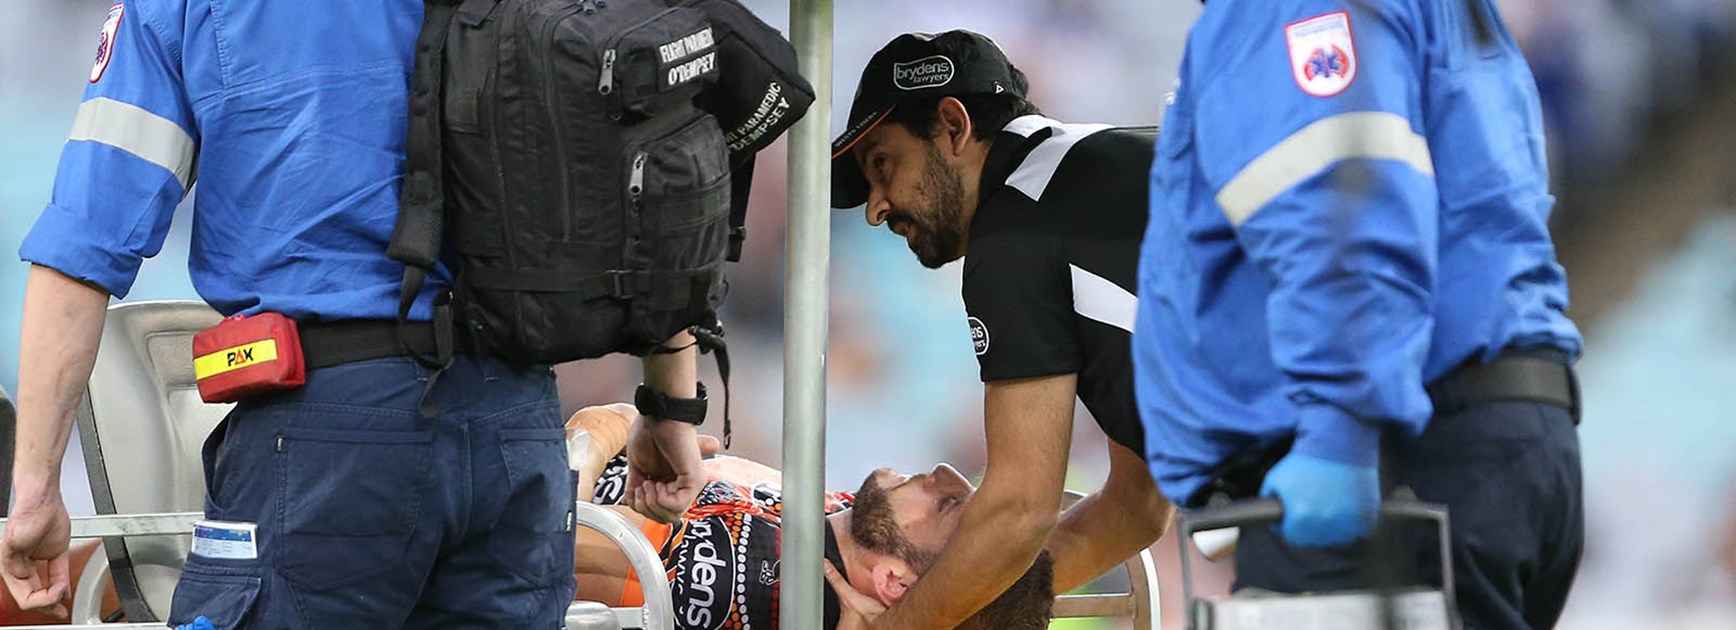 Robbie Farah was injured during his side's clash with the Bulldogs at ANZ Stadium.